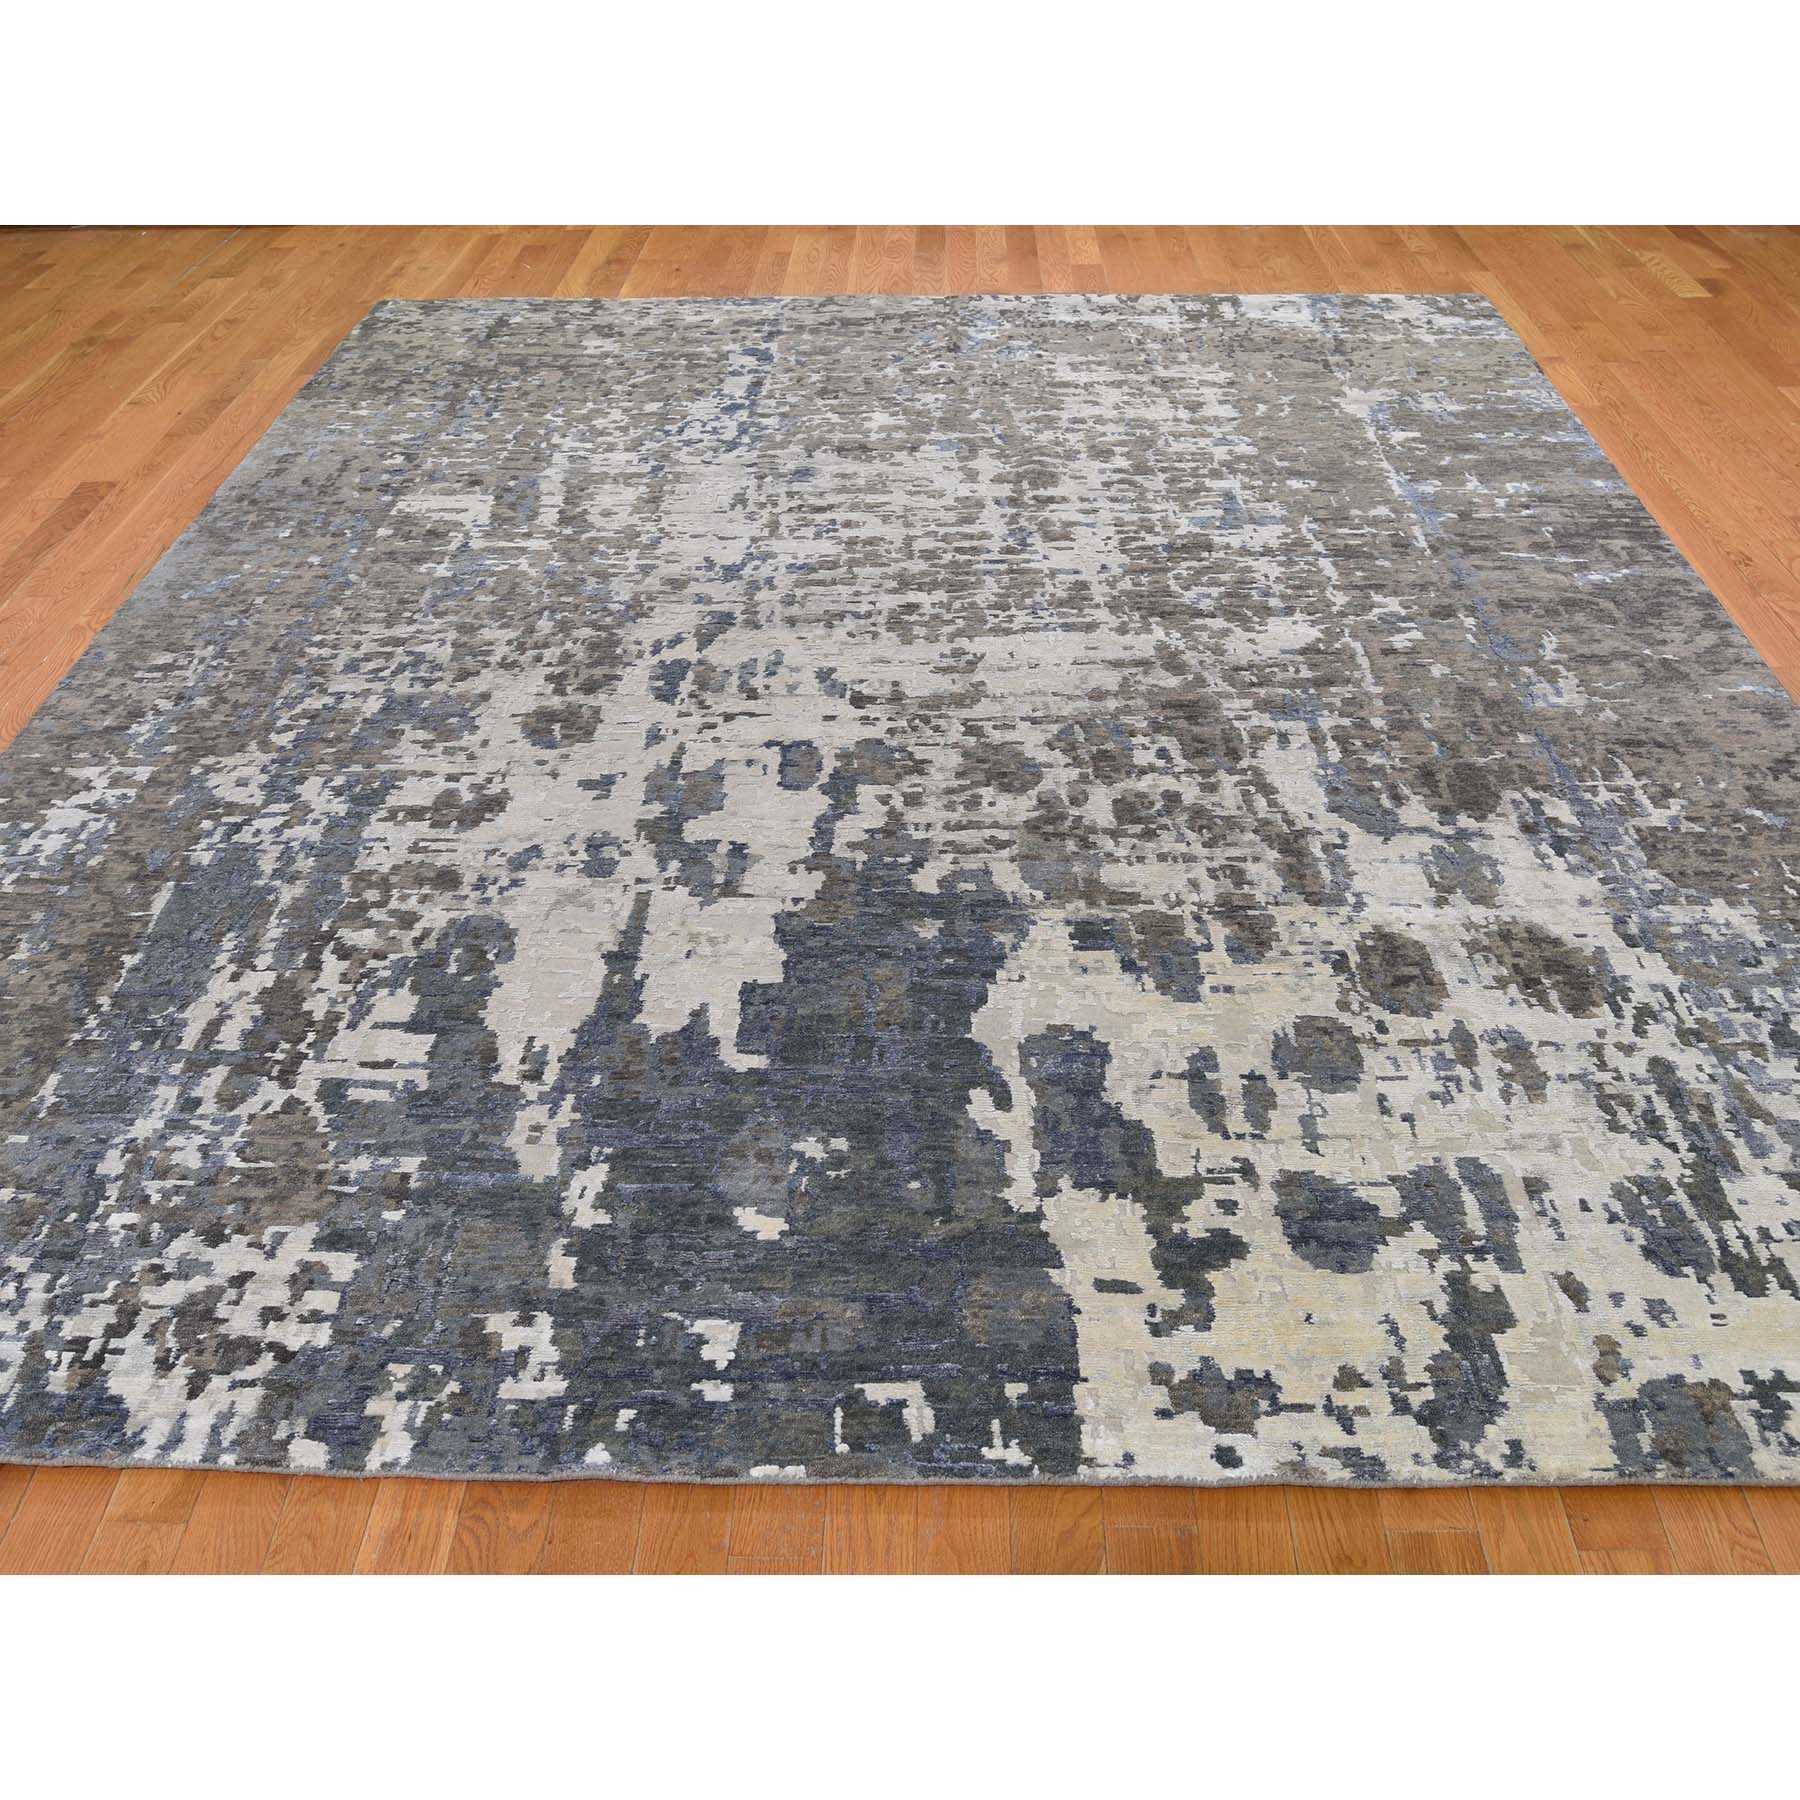 9-x11-10  Hi-Low Pile Abstract Design Wool And Silk Hand-Knotted Oriental Rug 